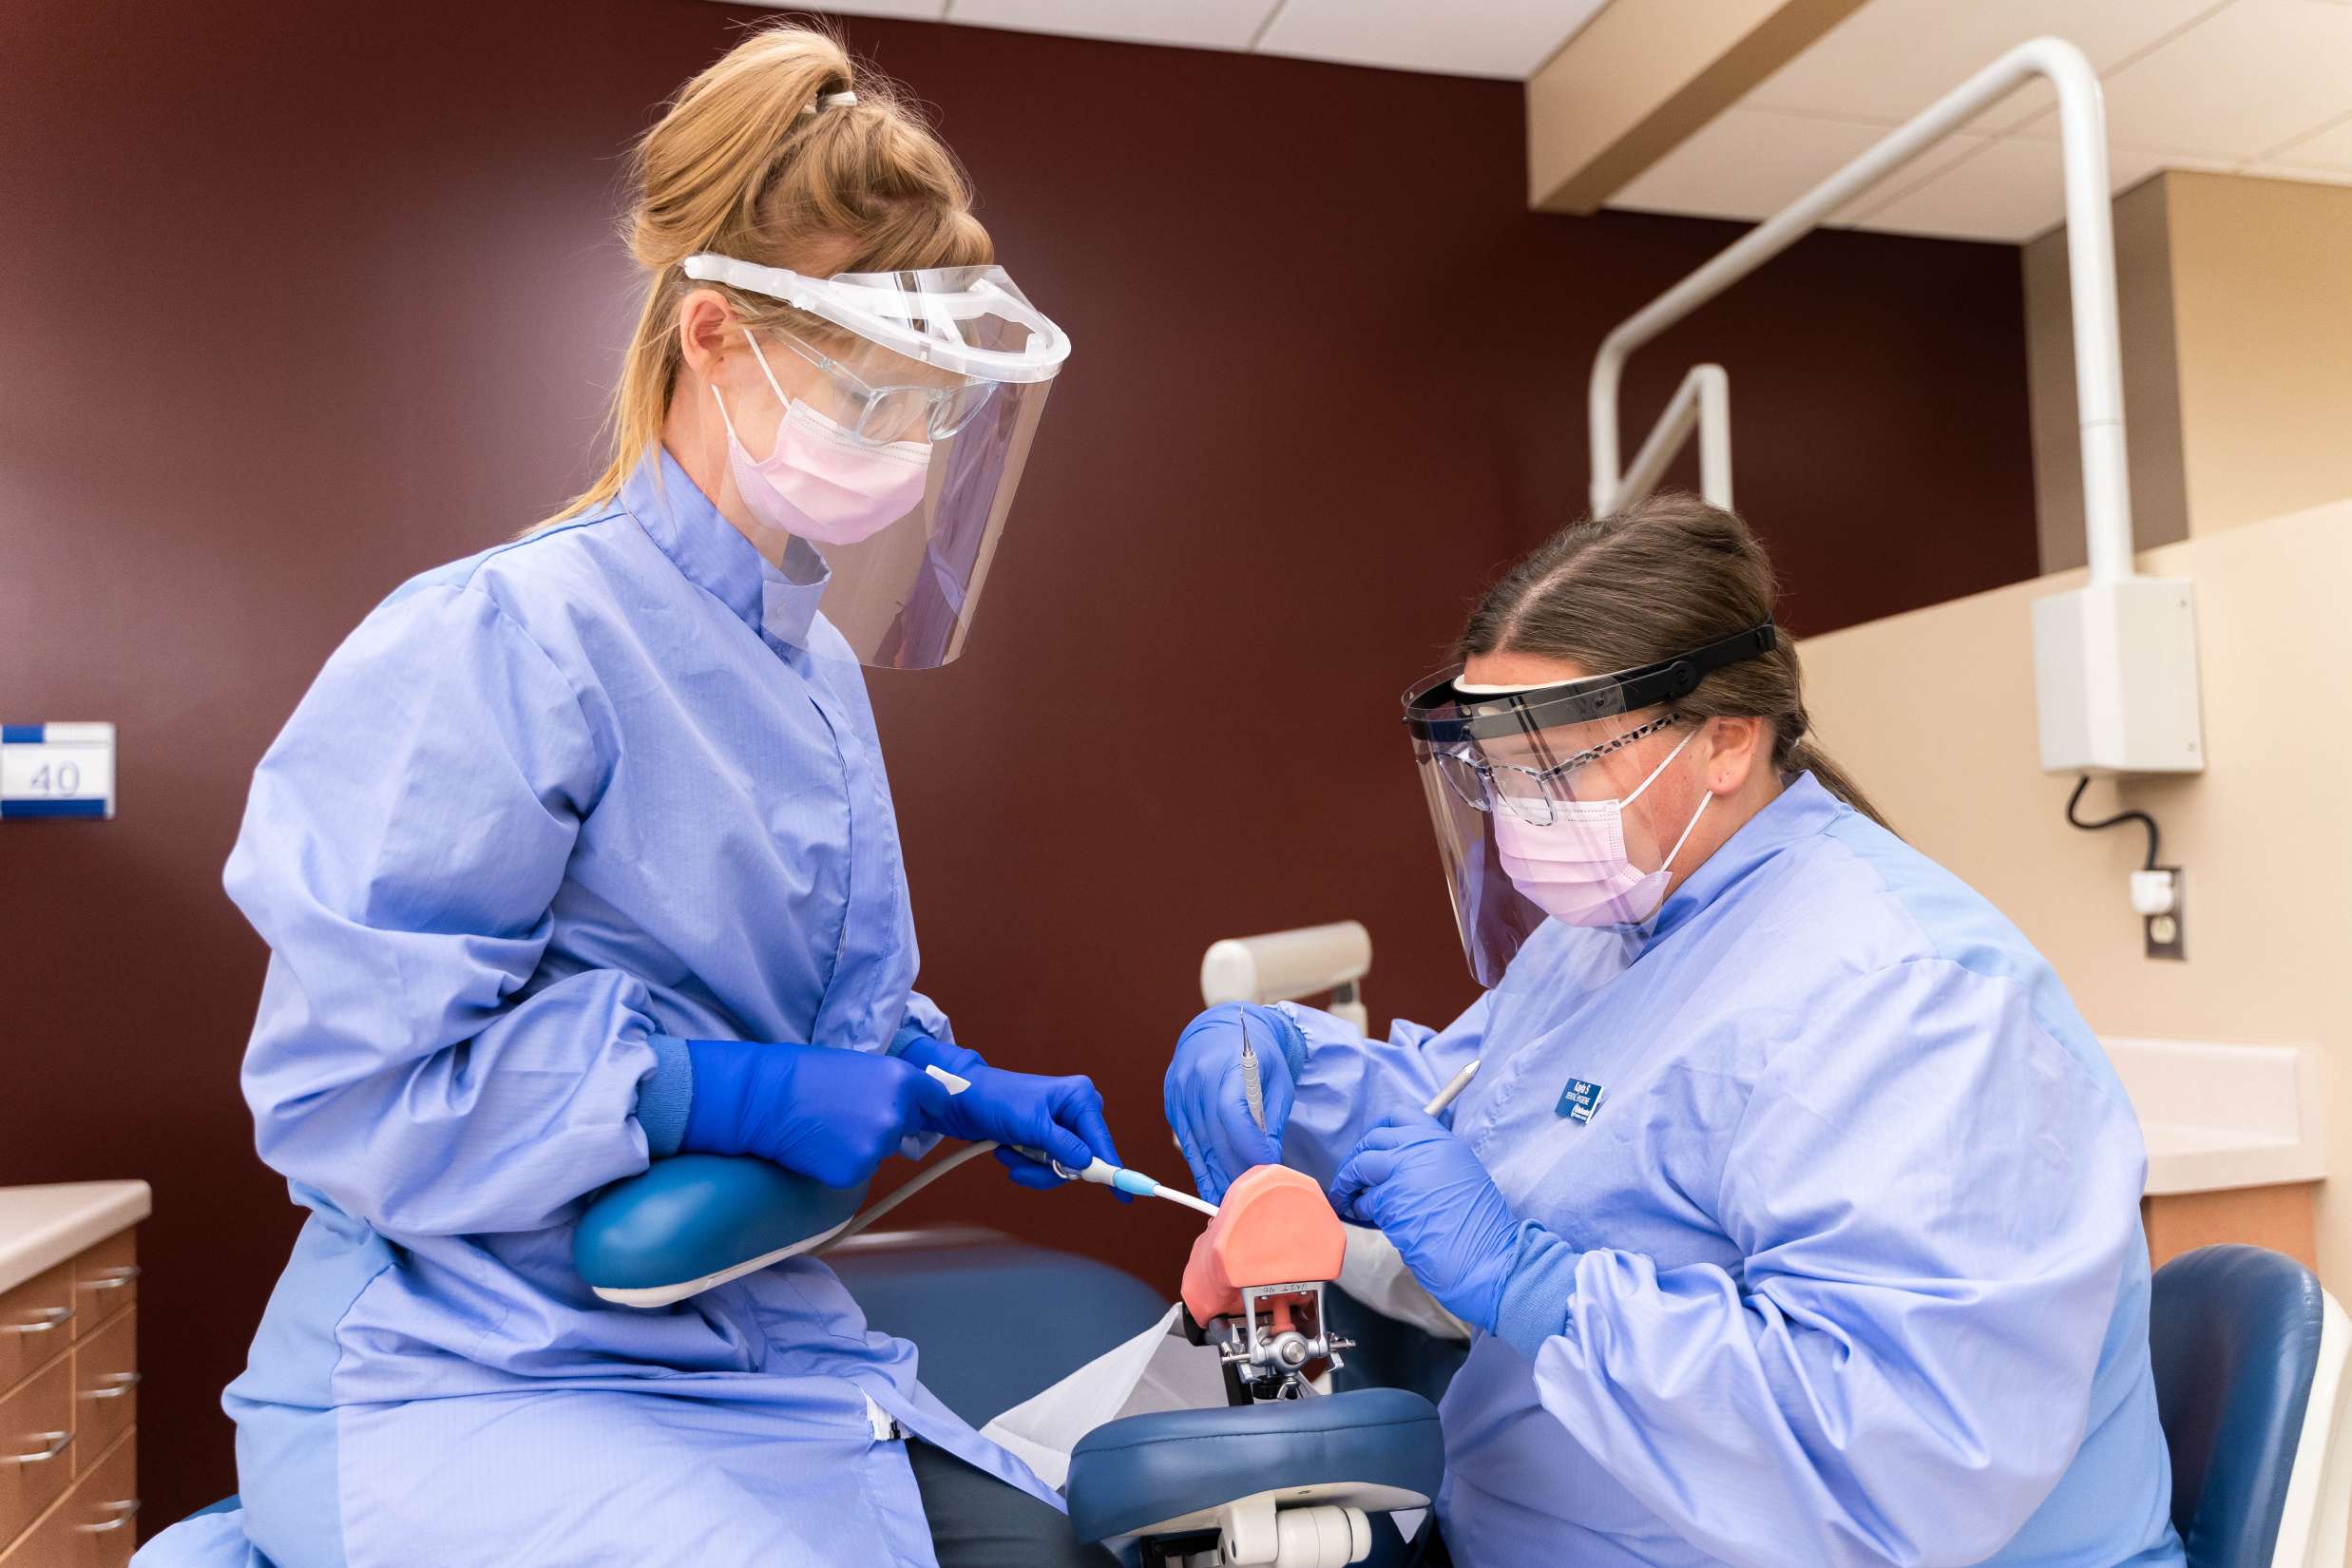 Two dental hygienists are using a mouth model to practice oral cleaning procedures.